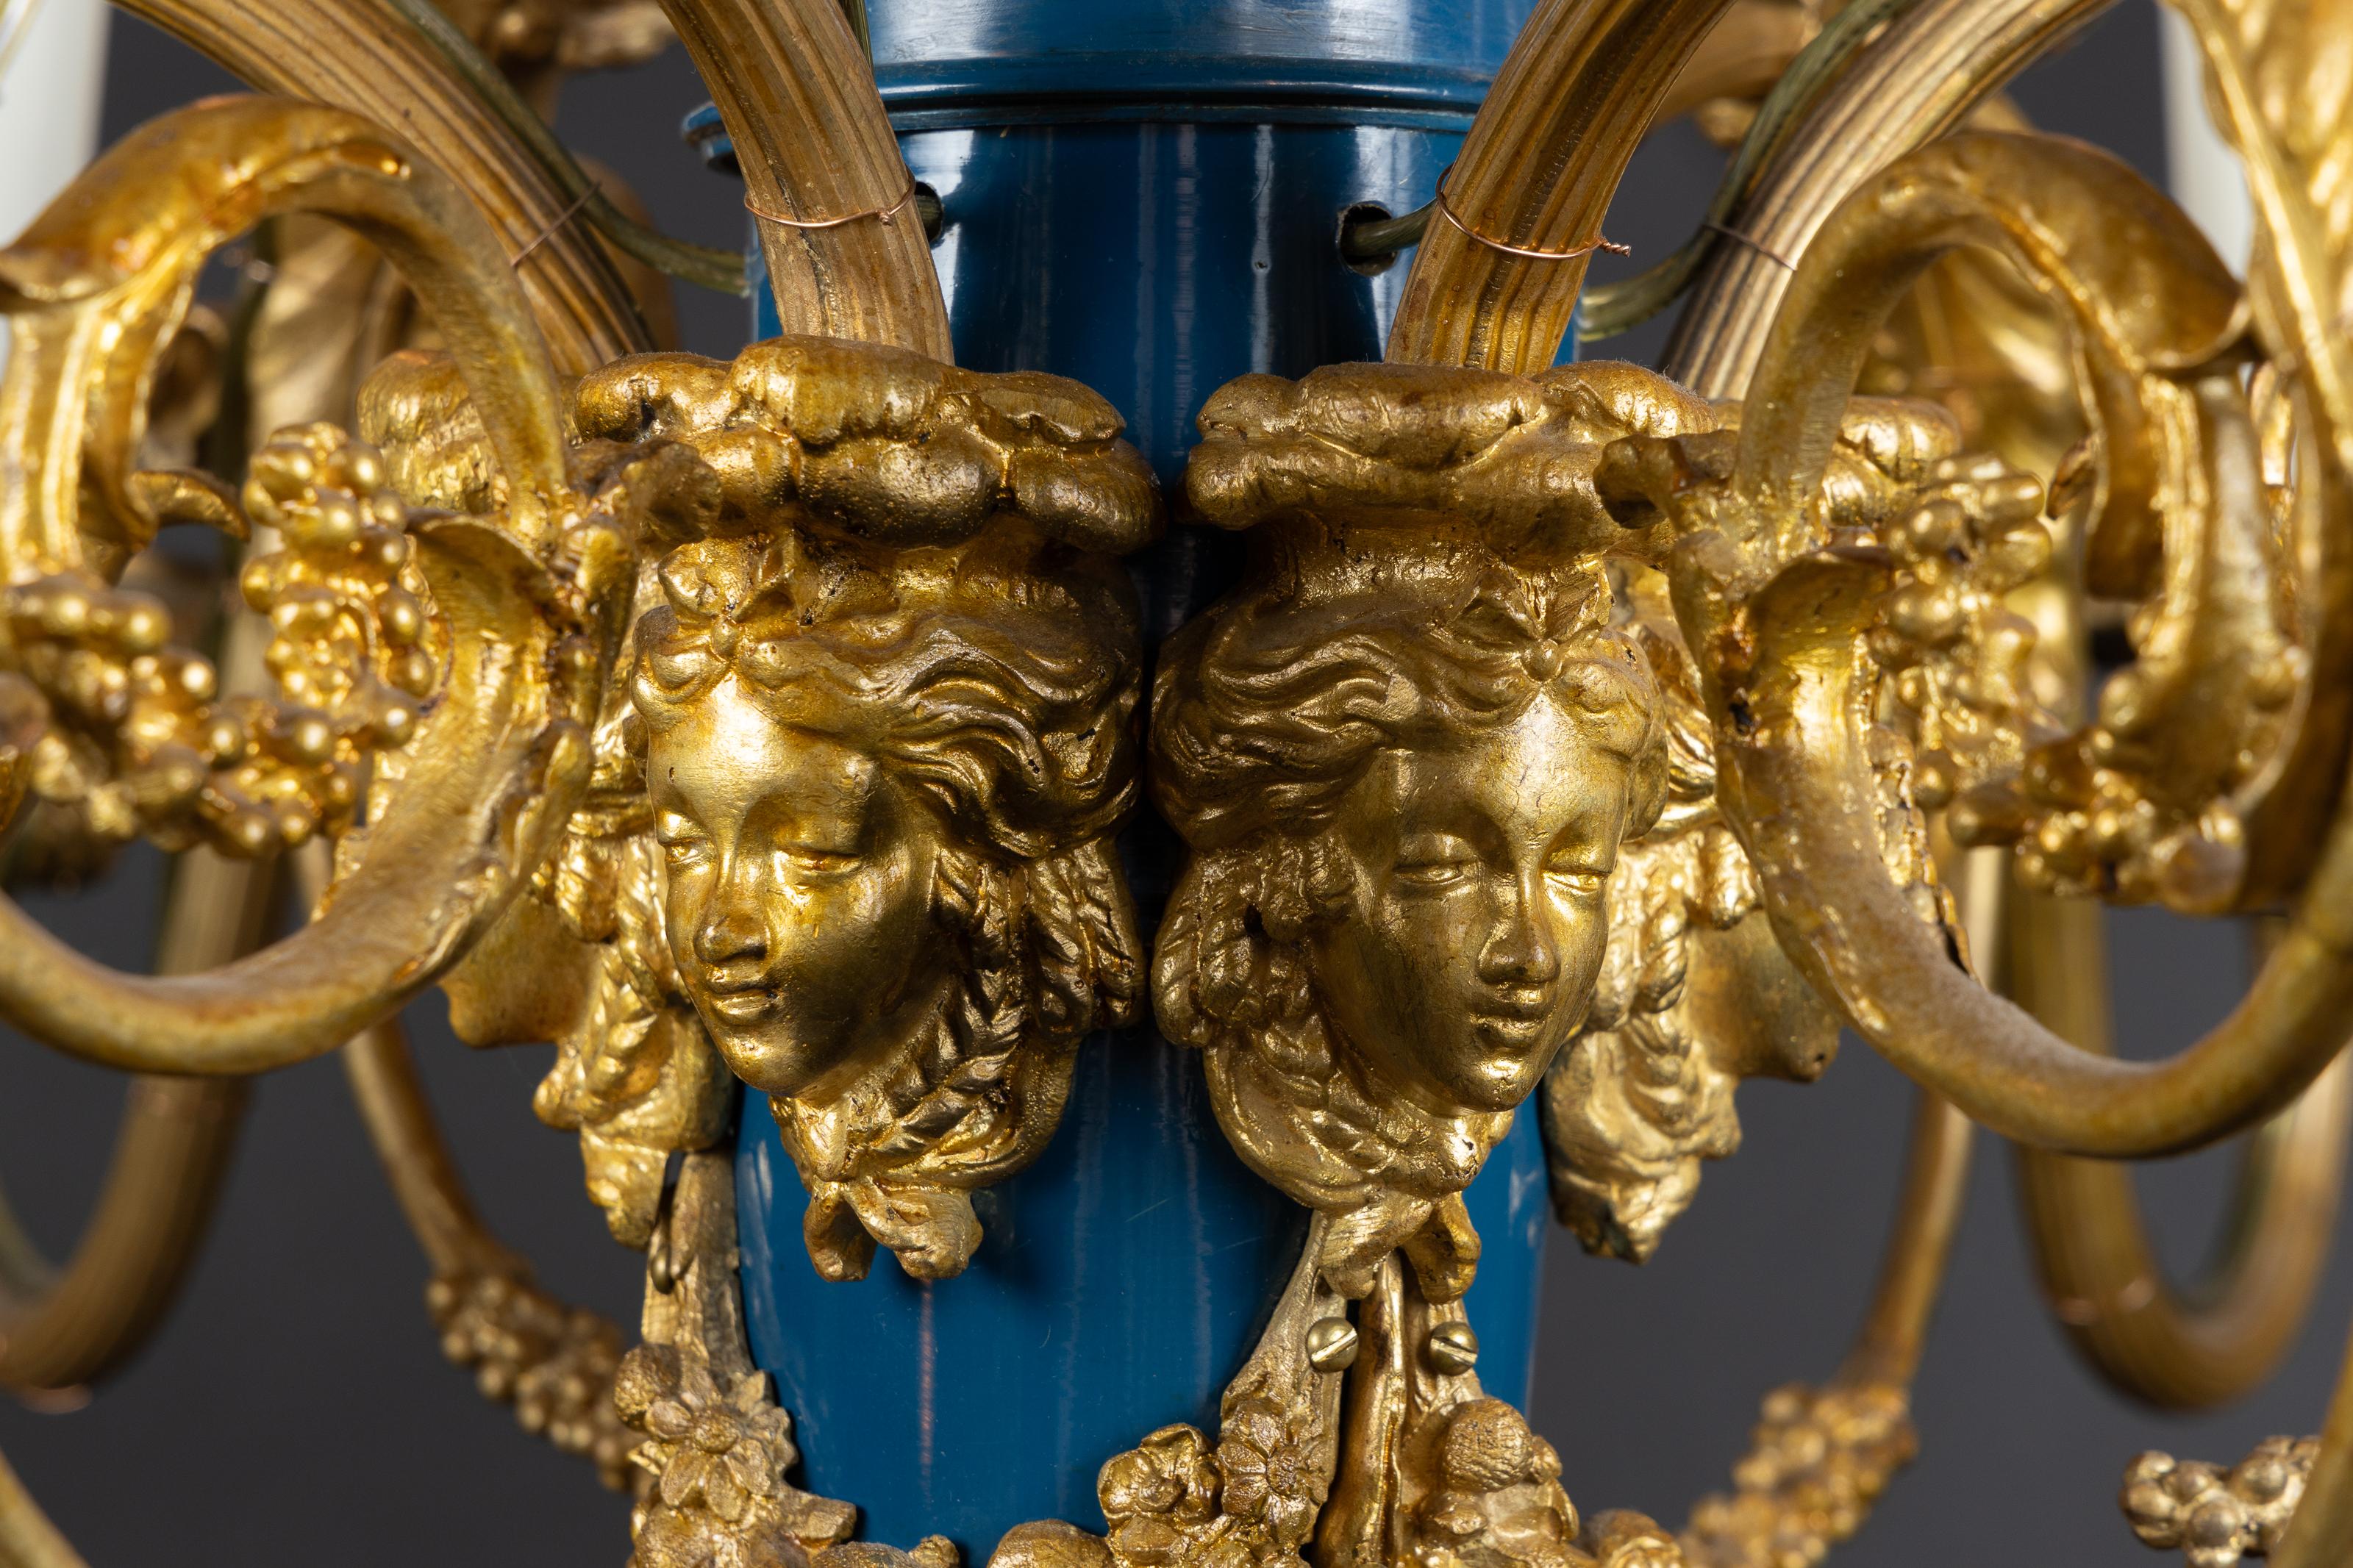 Showcasing a gorgeous Louis XVI chandelier made of bronze, encasing a blue enamel core with herm faces. The French antique piece dates back to 19th century and features a bow ribbon motif crown with rods descending towards the center. A ring of